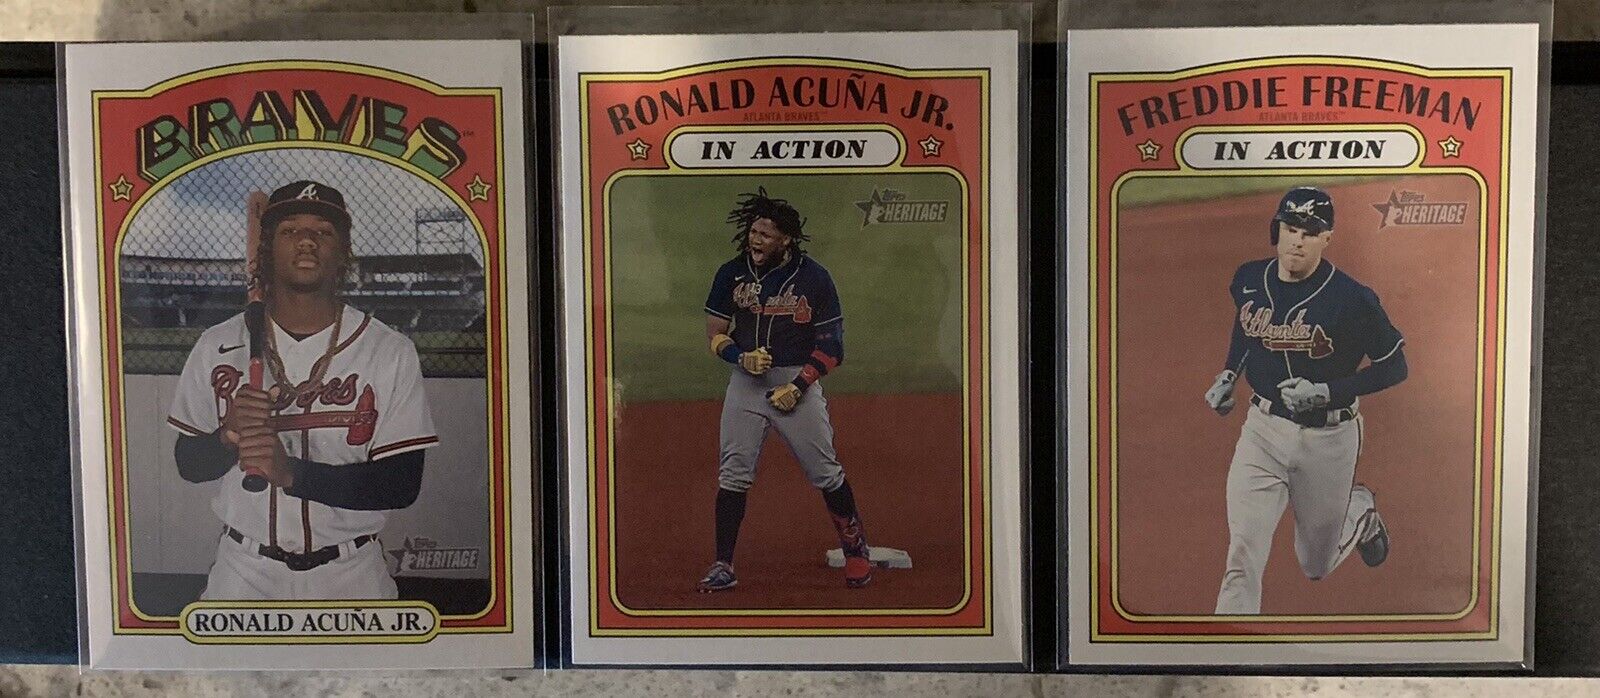 2021 Topps Heritage 3 Card Lot: Ronald Acuna Jr and Freddie Freeman. In Action